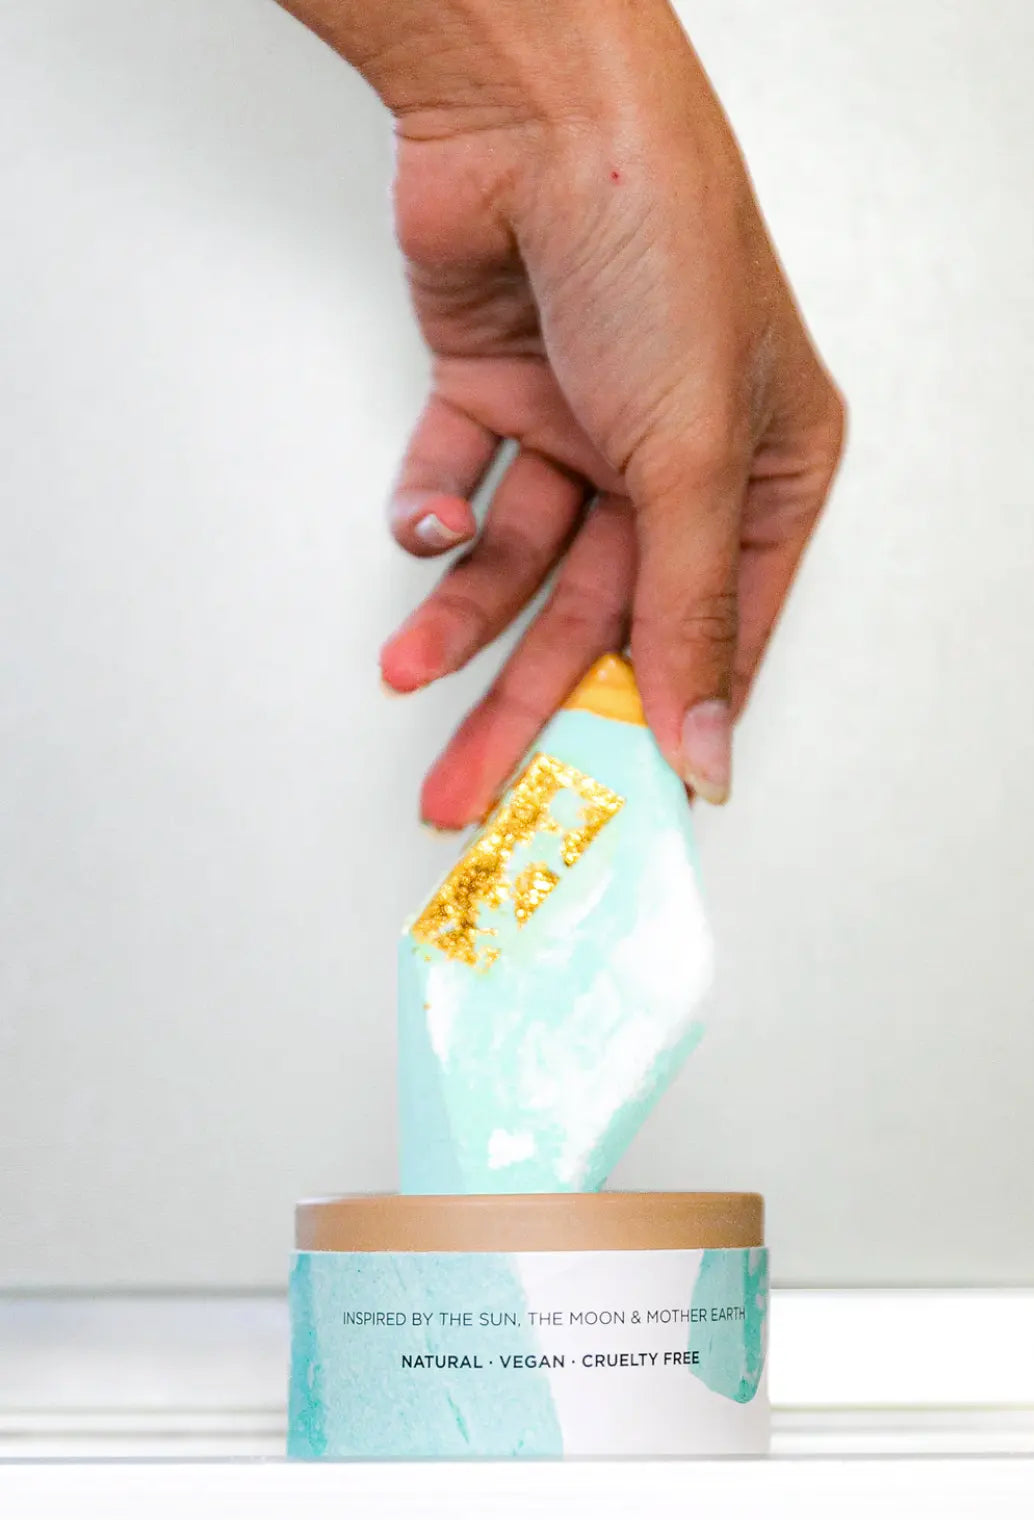 A hand is placing a Summer Salt Body Aquamarine Lemongrass Crystal Bath Bomb, infused with aromatherapy scents, into a box.